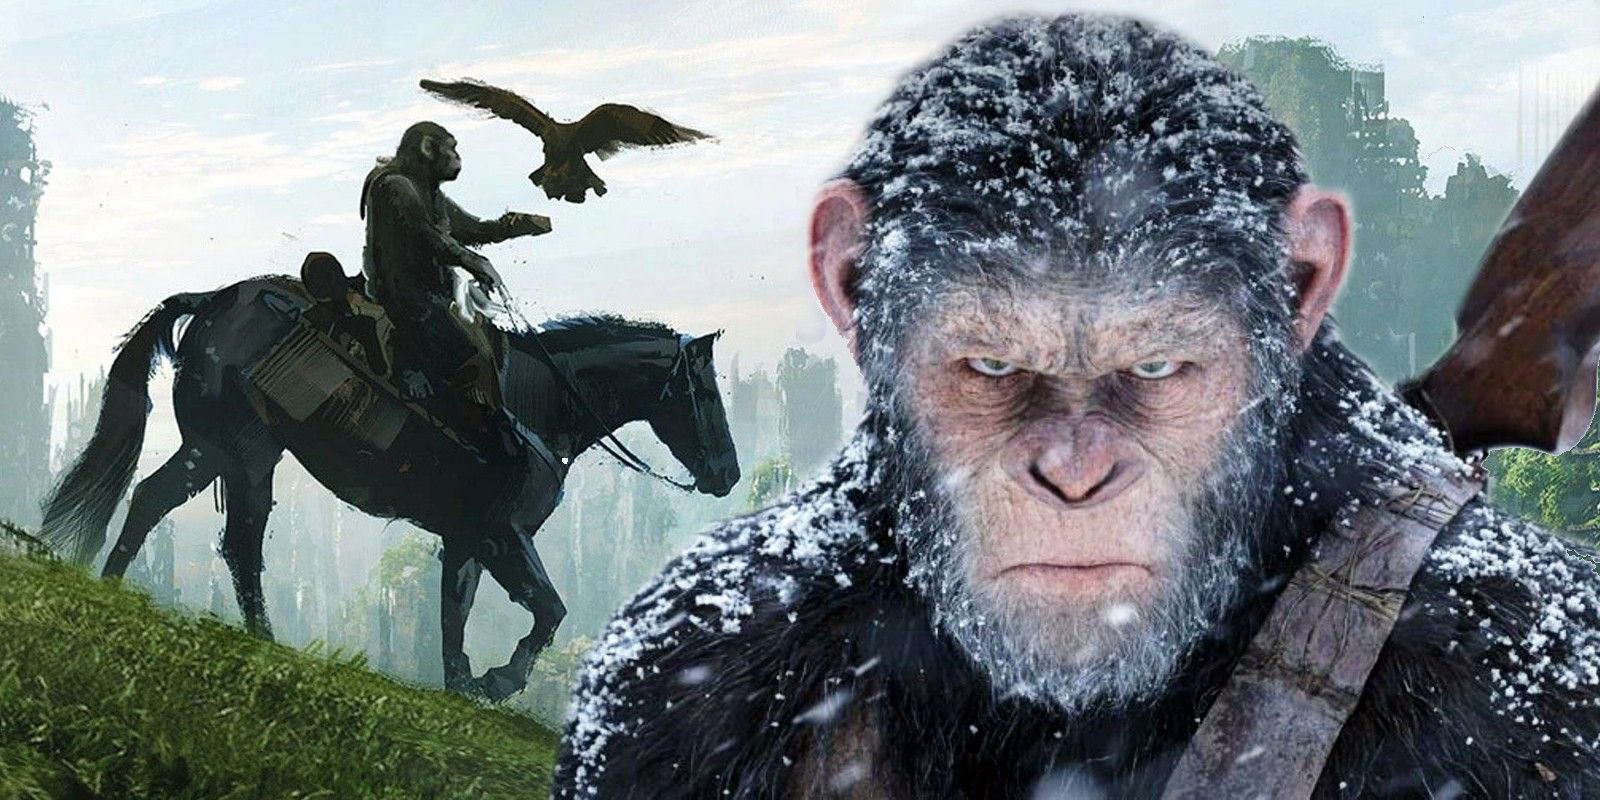 Kingdom of the of the Apes Release Date, Cast, Story, Trailer